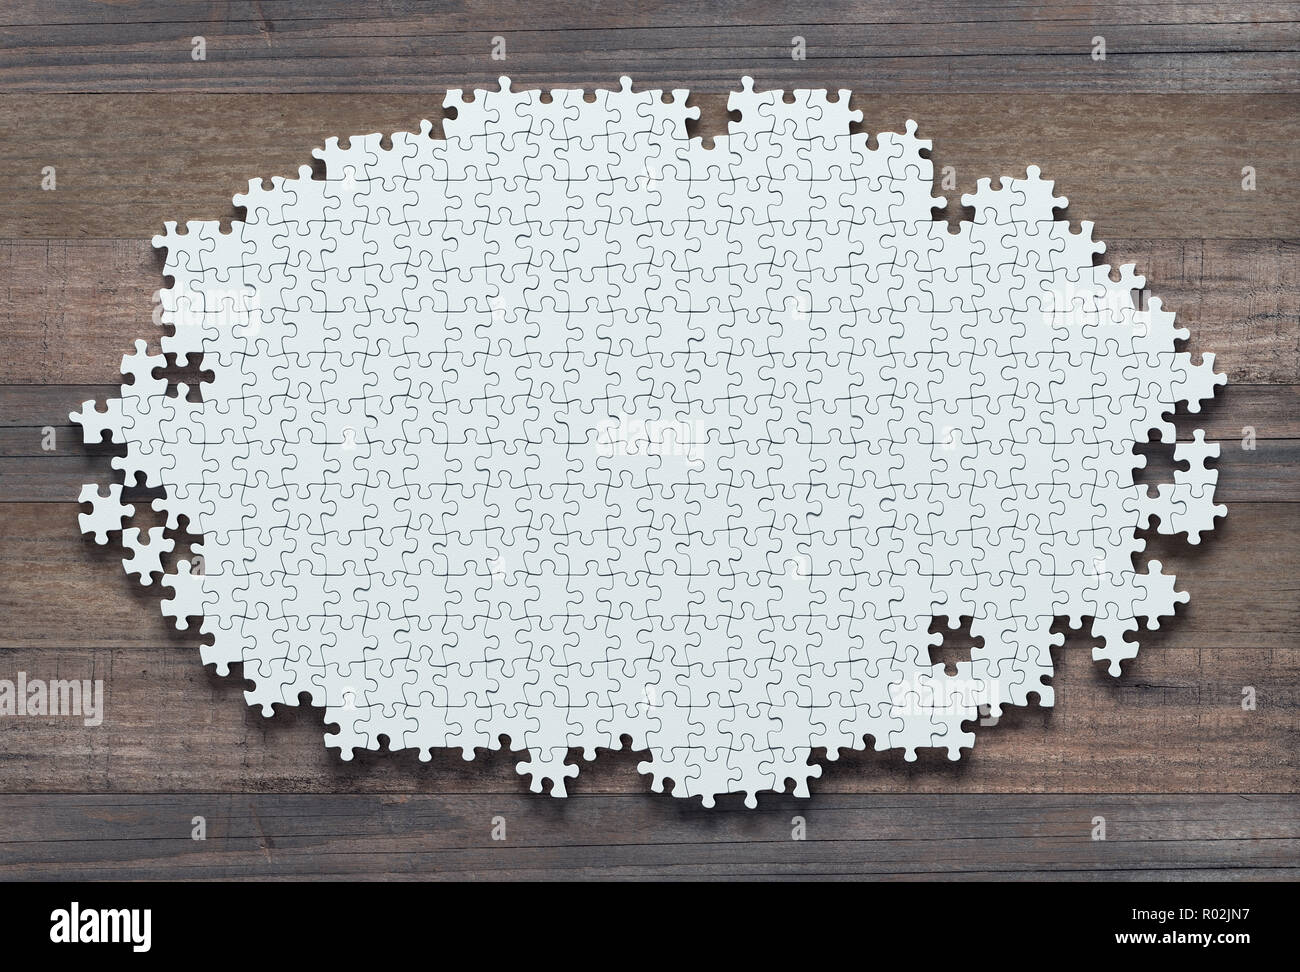 Blank jigsaw puzzle missing pieces to finish. Concept of work not completed. Stock Photo